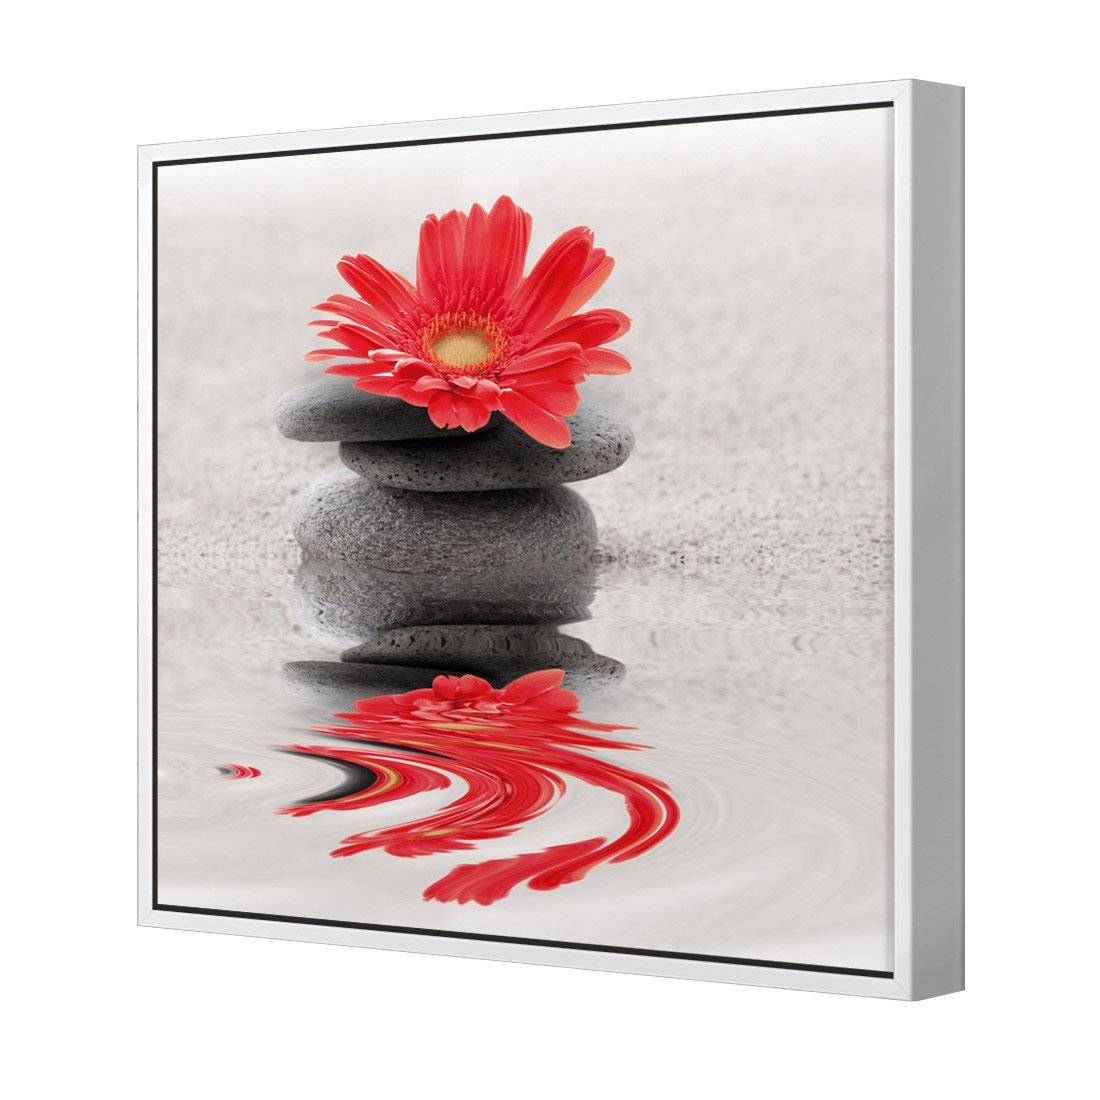 Red Flower Reflection Canvas Art-Canvas-Wall Art Designs-30x30cm-Canvas - White Frame-Wall Art Designs